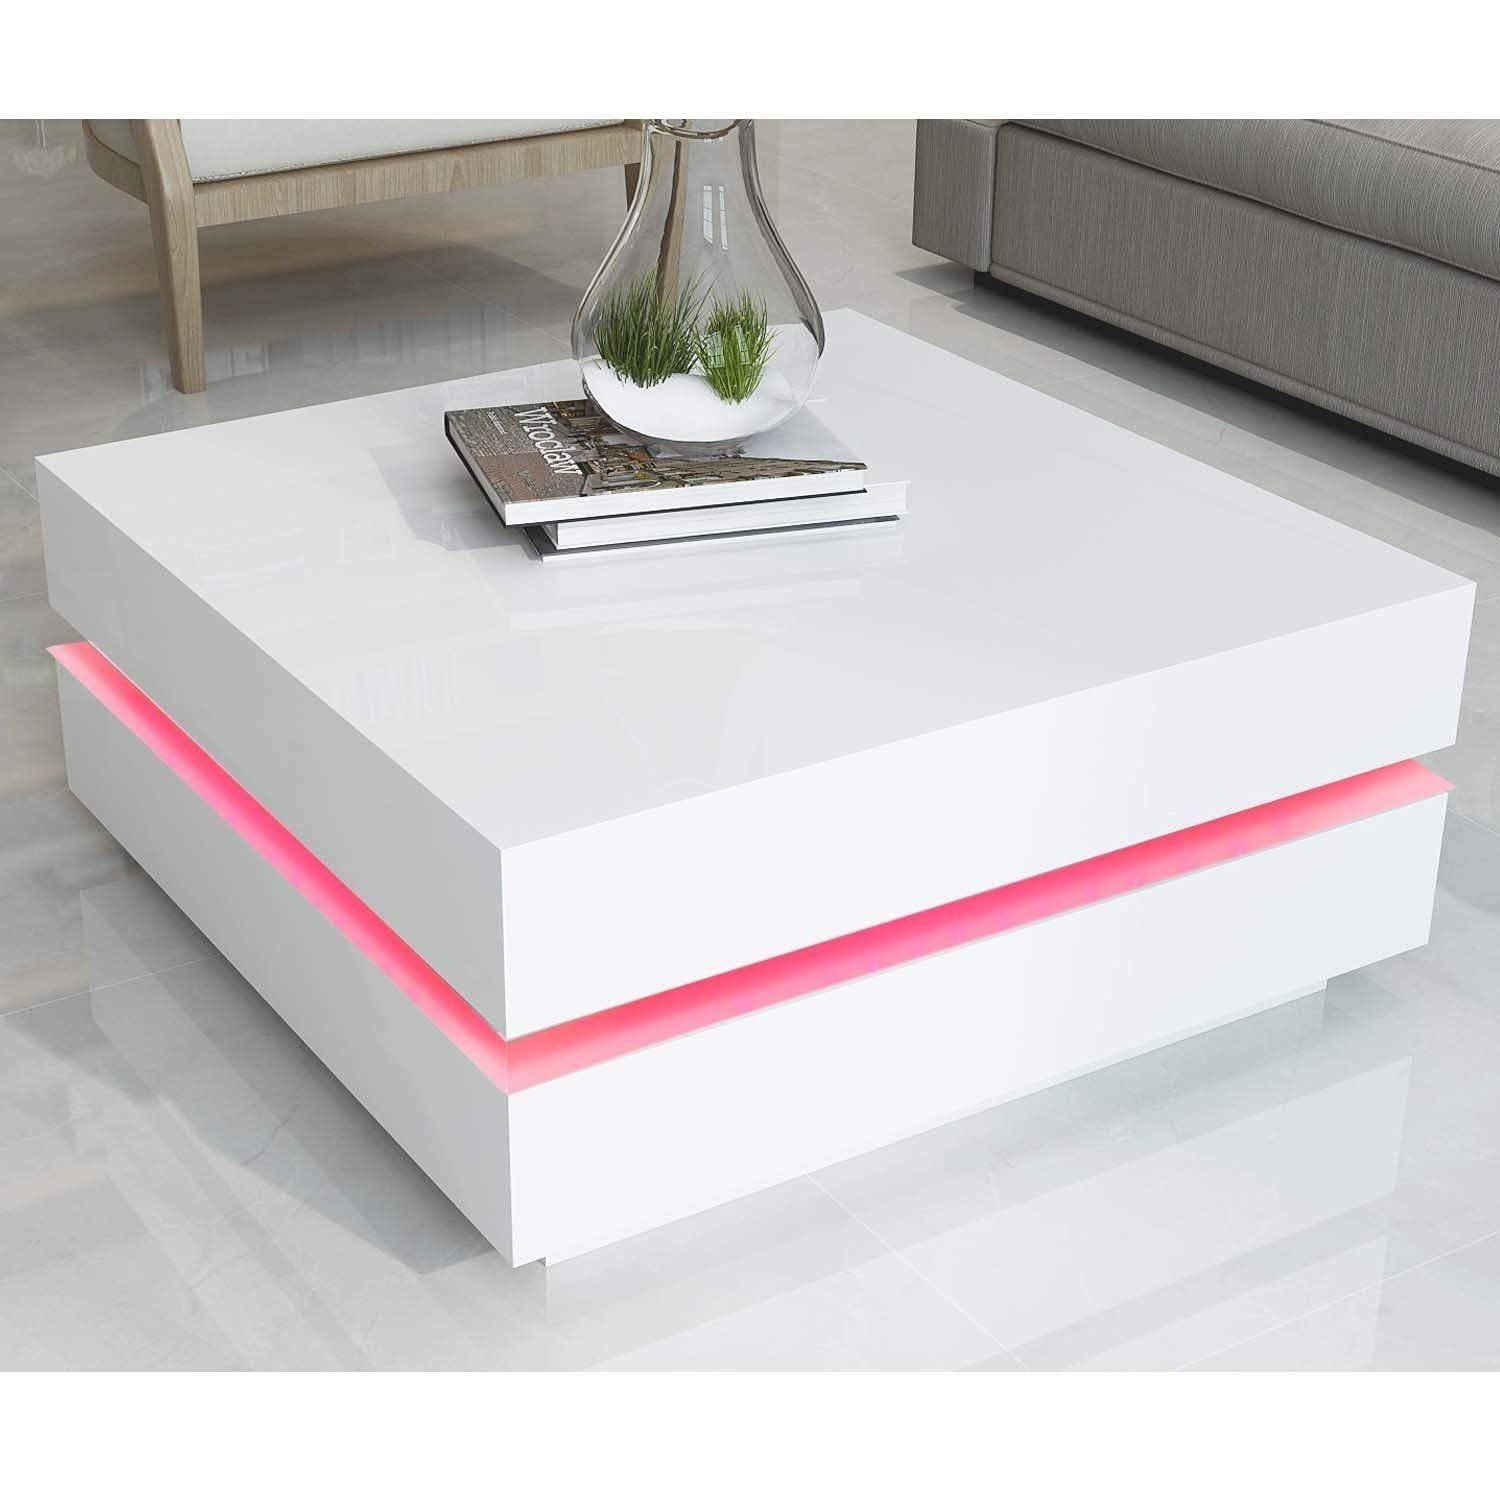 Tiffany White High Gloss Cubic Led Coffee Table | Coffee Tables Pertaining To Stack Hi Gloss Wood Coffee Tables (View 19 of 30)